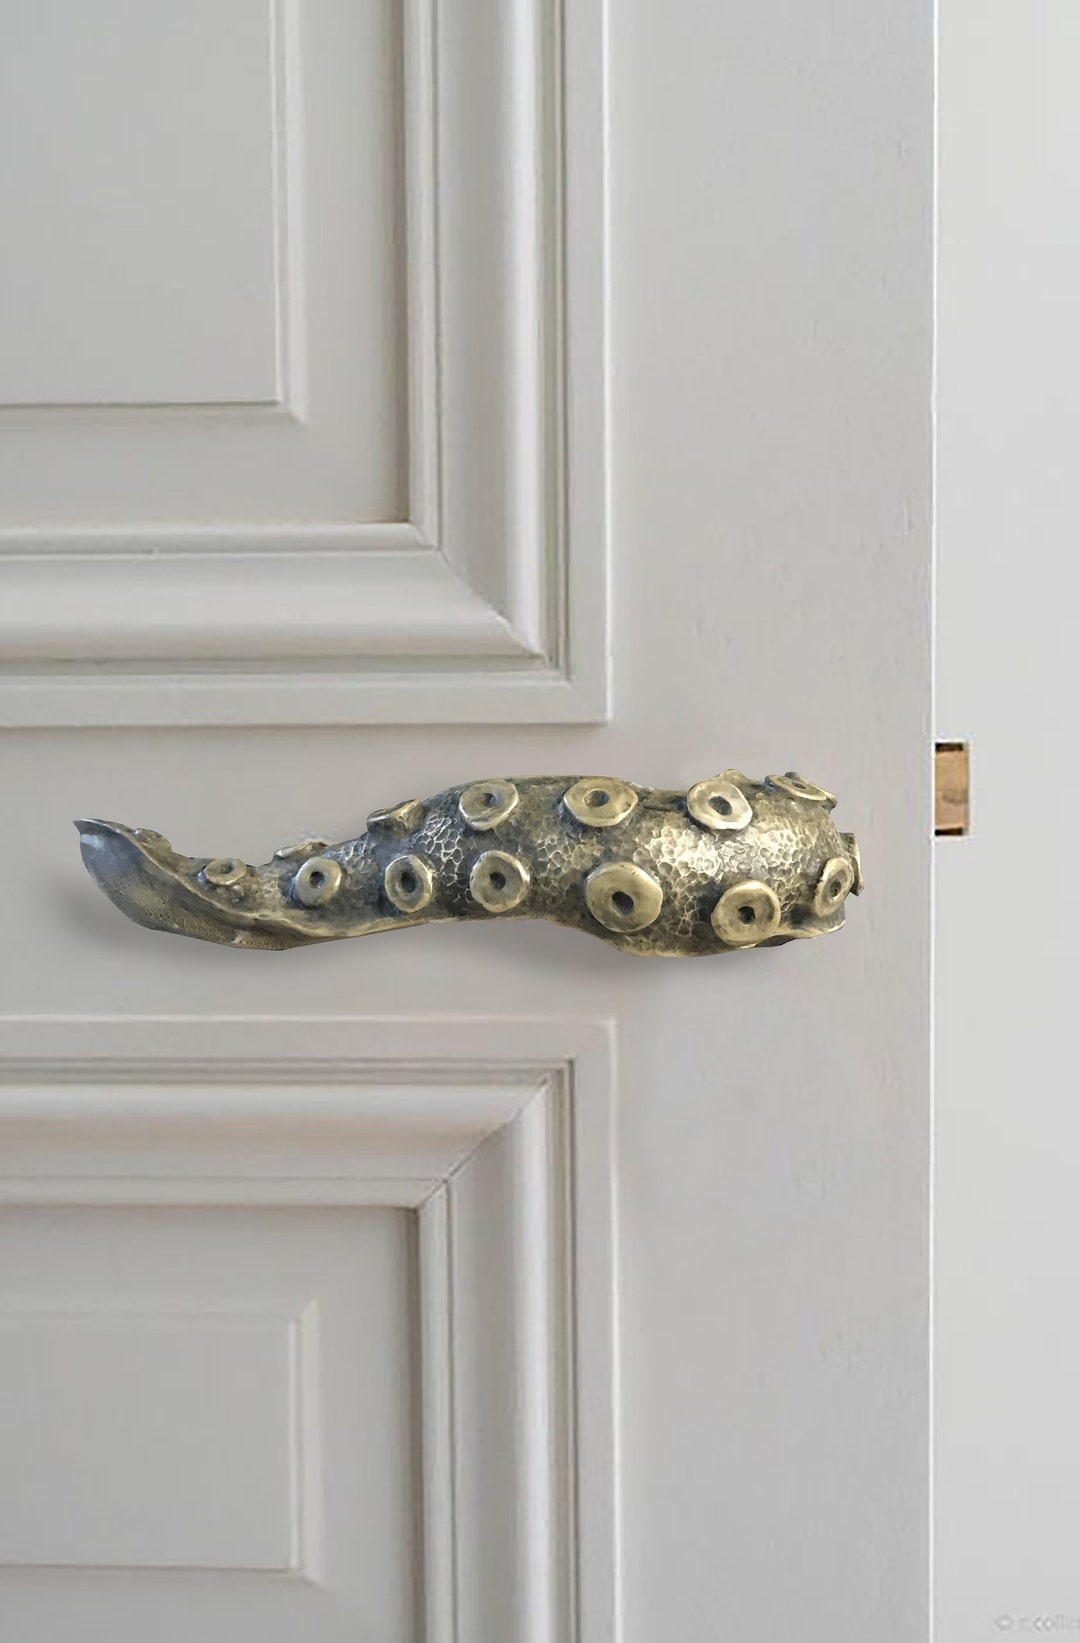 Why Do French Doors Have The Knob In The Middle – Octopus Doors